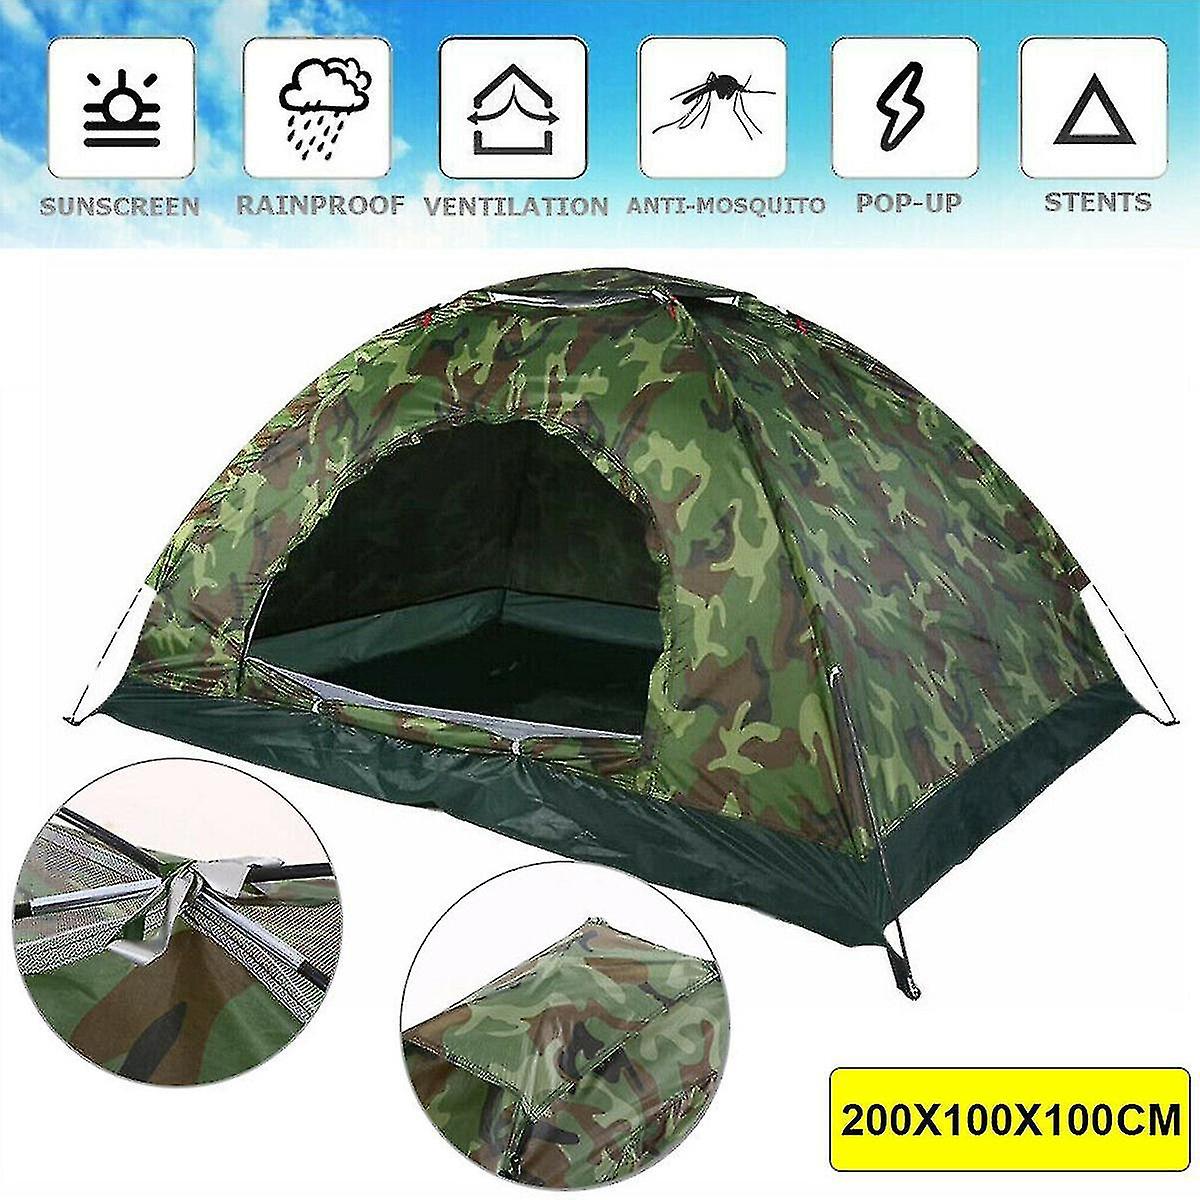 Jtween 2 Person Tent Dome Tents For Camping， Waterproof Windproof Backpacking Tent Easy Set Up Small